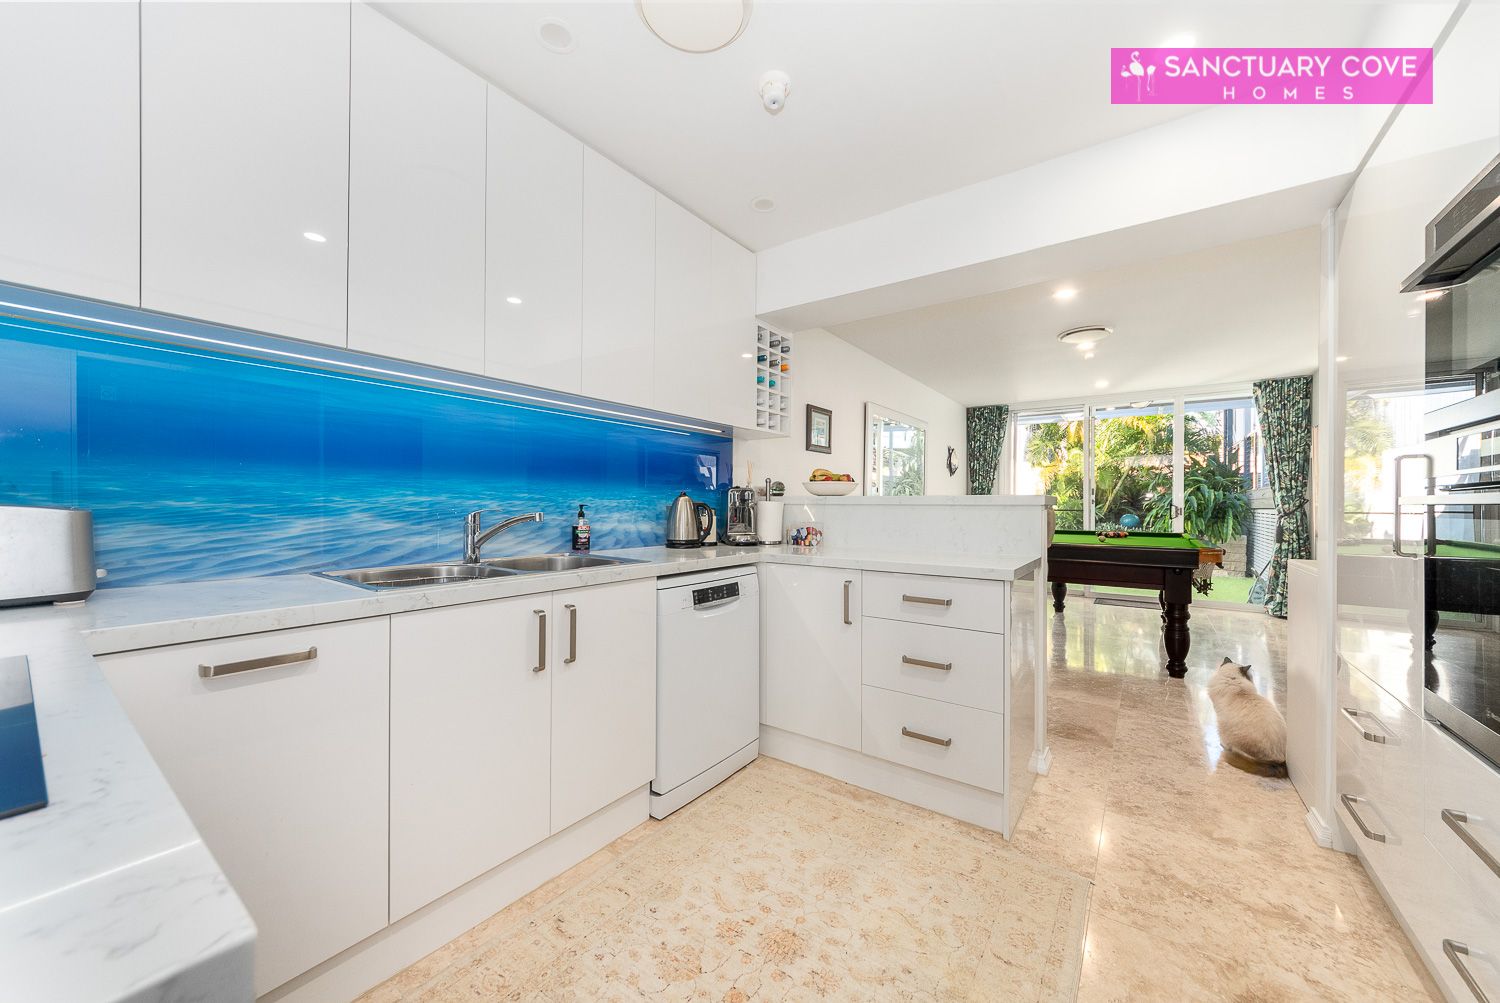 4684 THE PARKWAY, Sanctuary Cove QLD 4212, Image 2